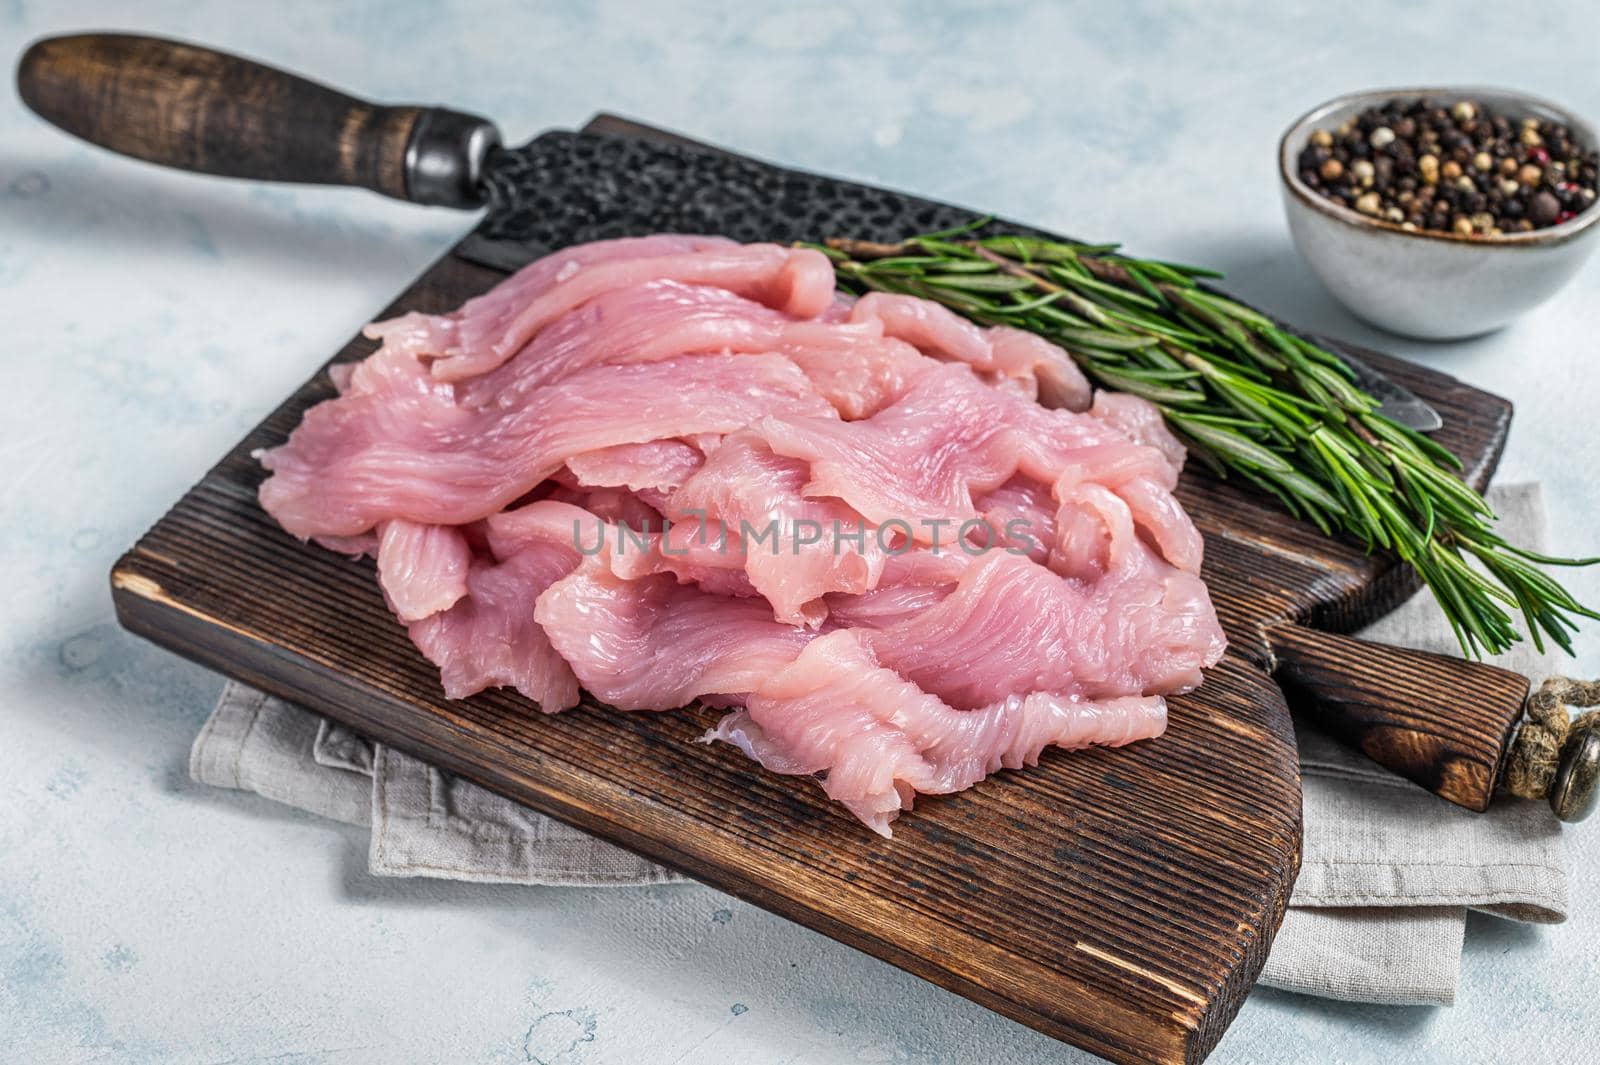 Sliced Raw turkey or chicken fillet meat on a cutting board with butcher knife. White background. Top View by Composter